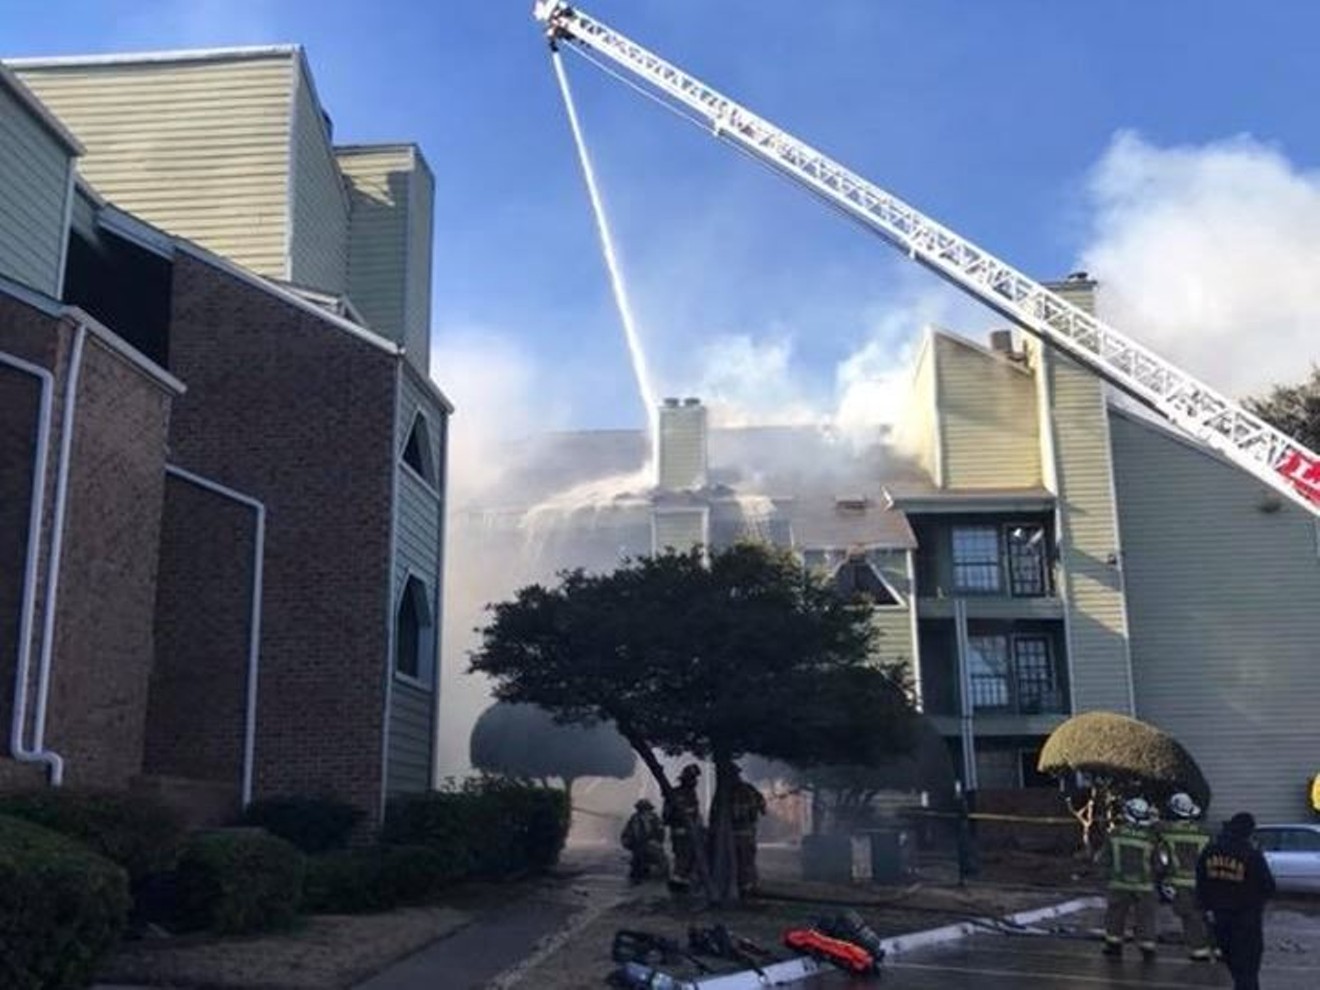 Firefighters extinguished a four-alarm fire at the Sable Ridge apartment complex in North Dallas on Jan. 25.